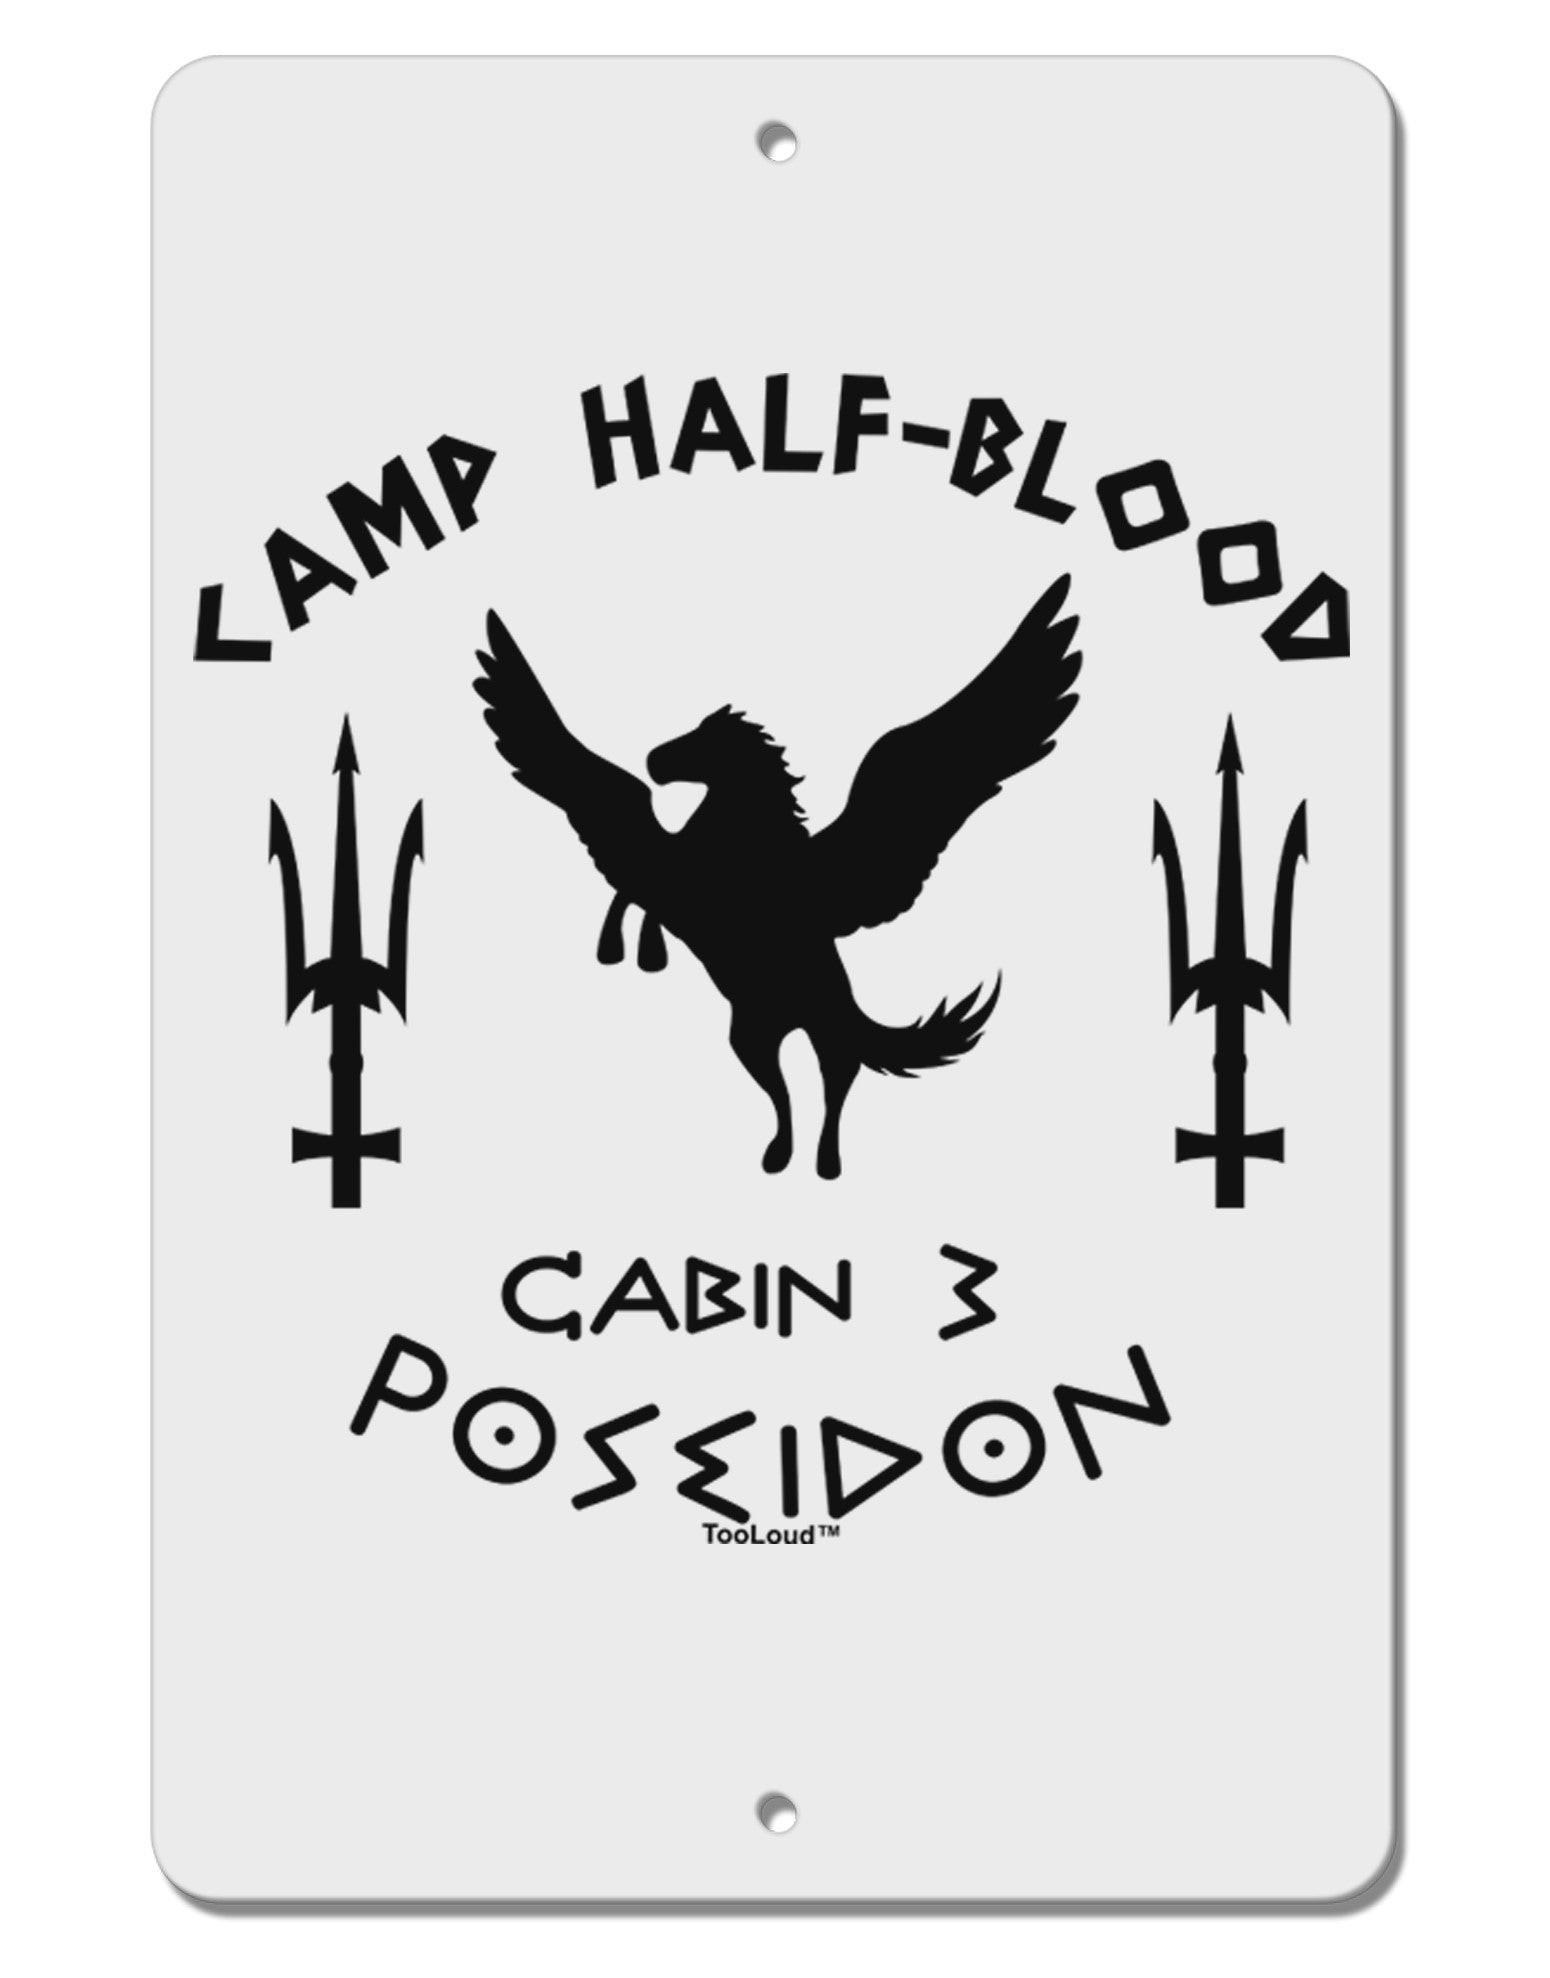 What cabin at Camp Half-Blood would you be in, including all the